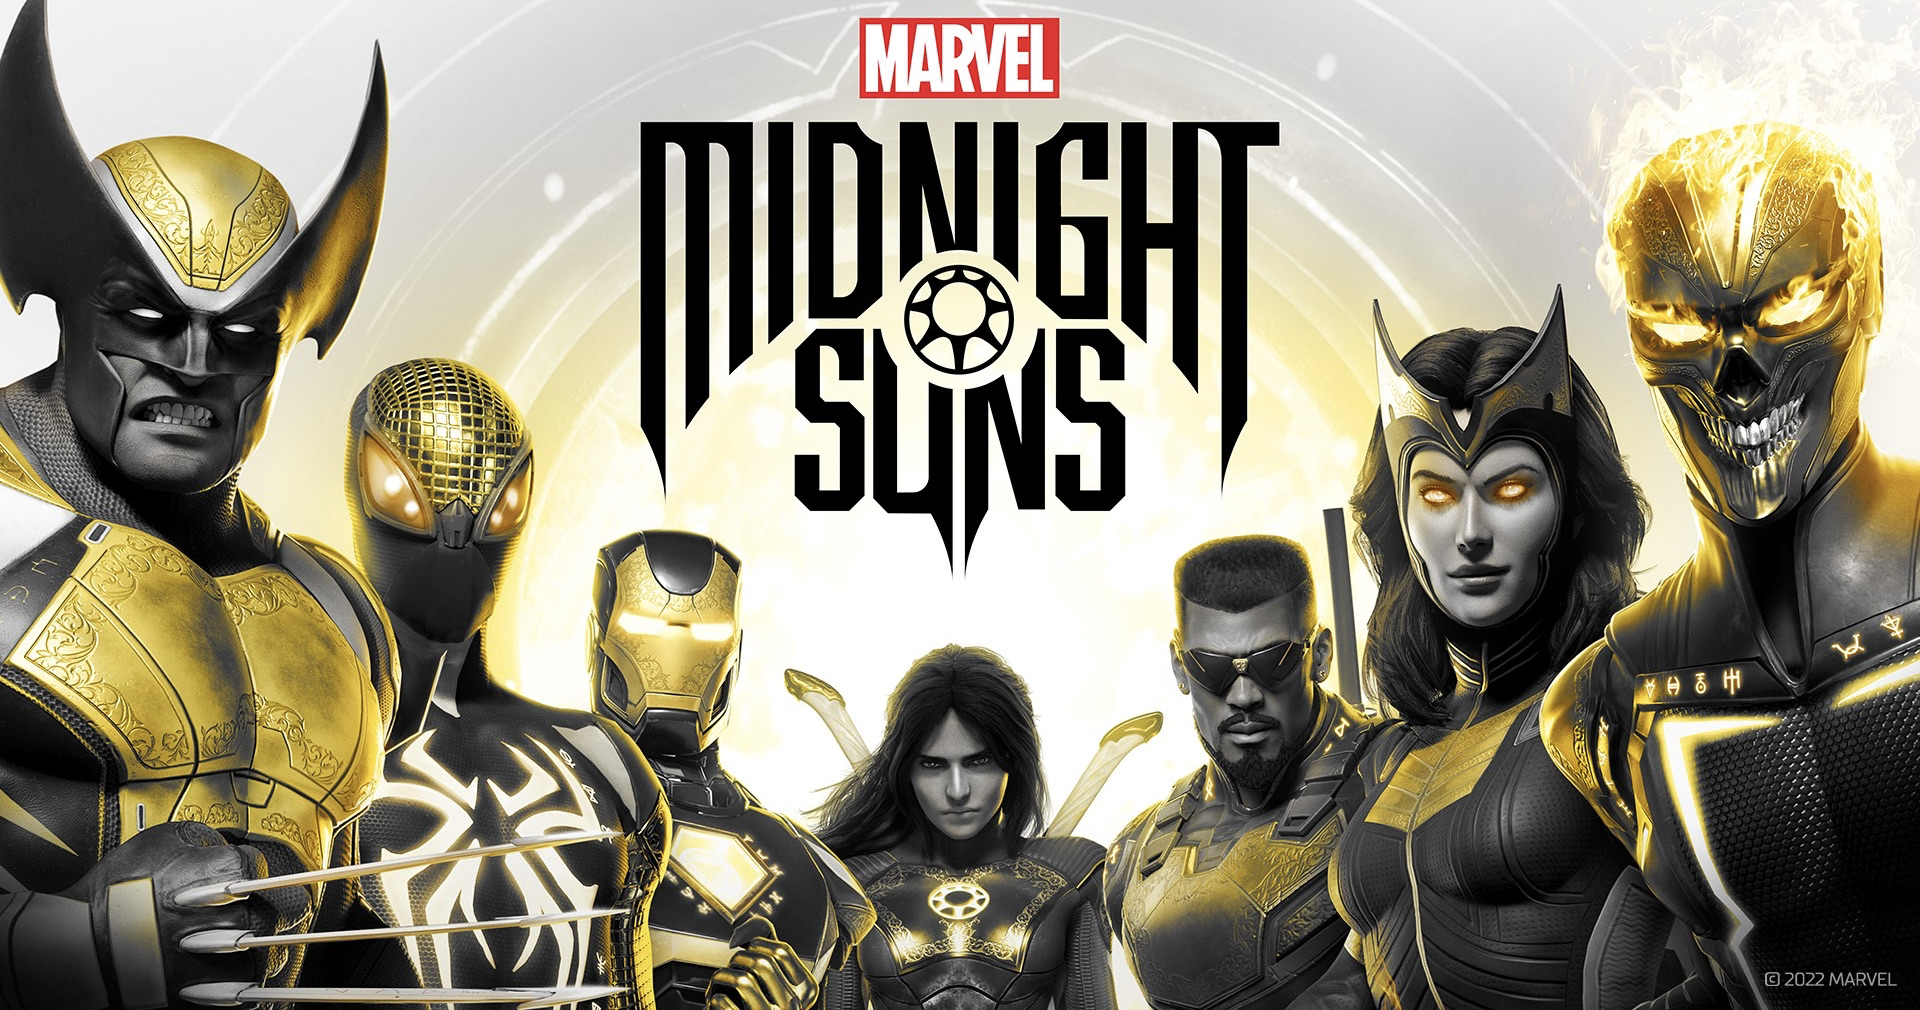 Marvel's Midnight Suns release date set for December on Xbox Series X